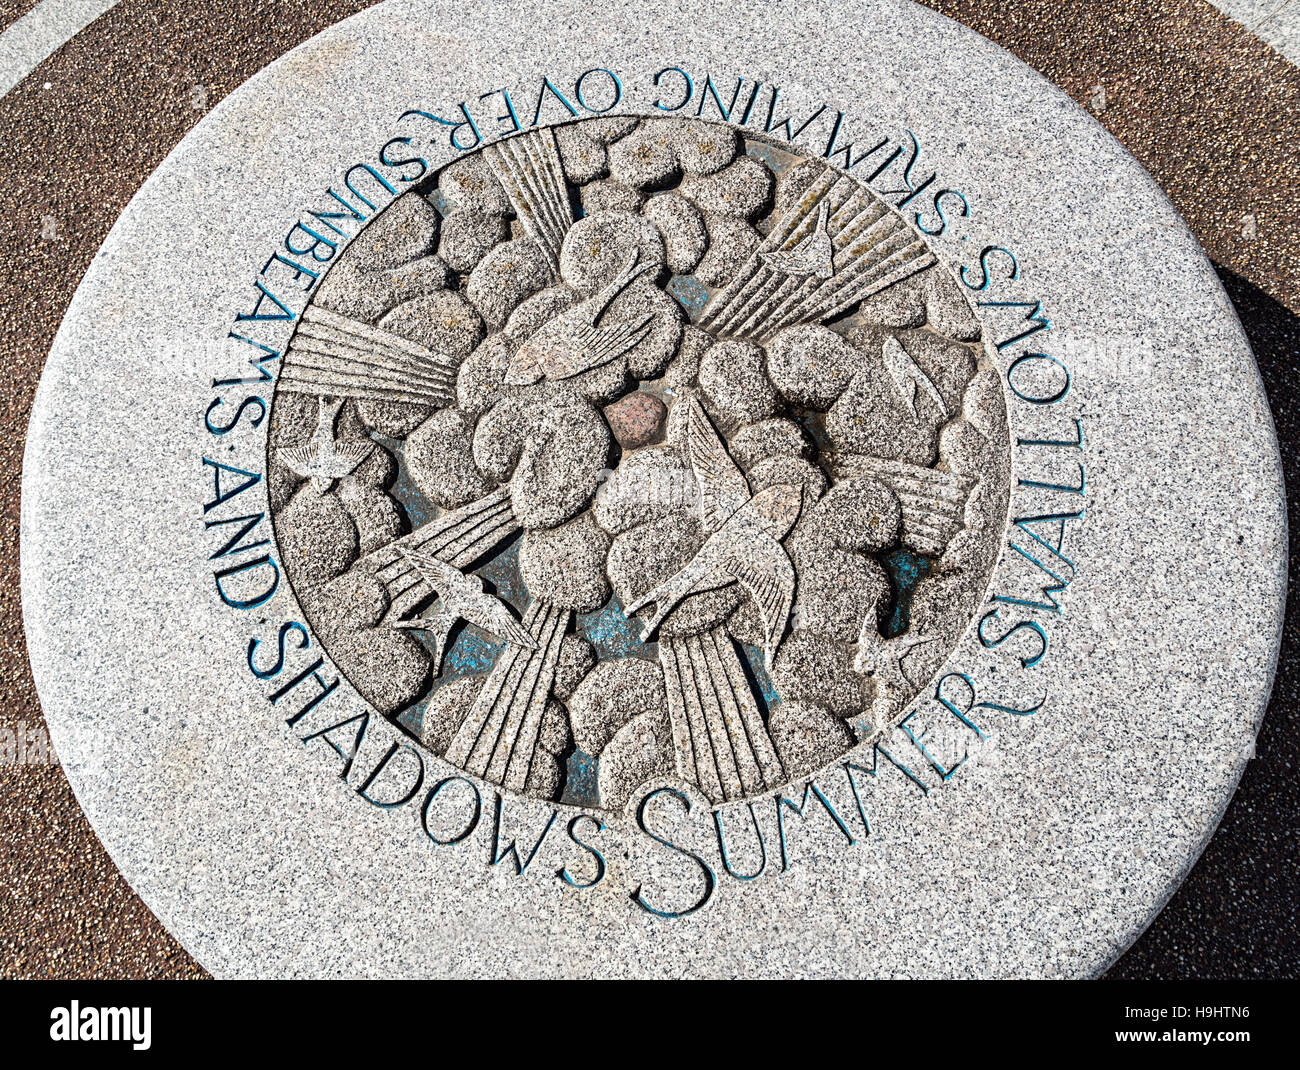 Swallows and Amazons artwork in stone on Stone Jetty, Morecambe, England, UK Stock Photo